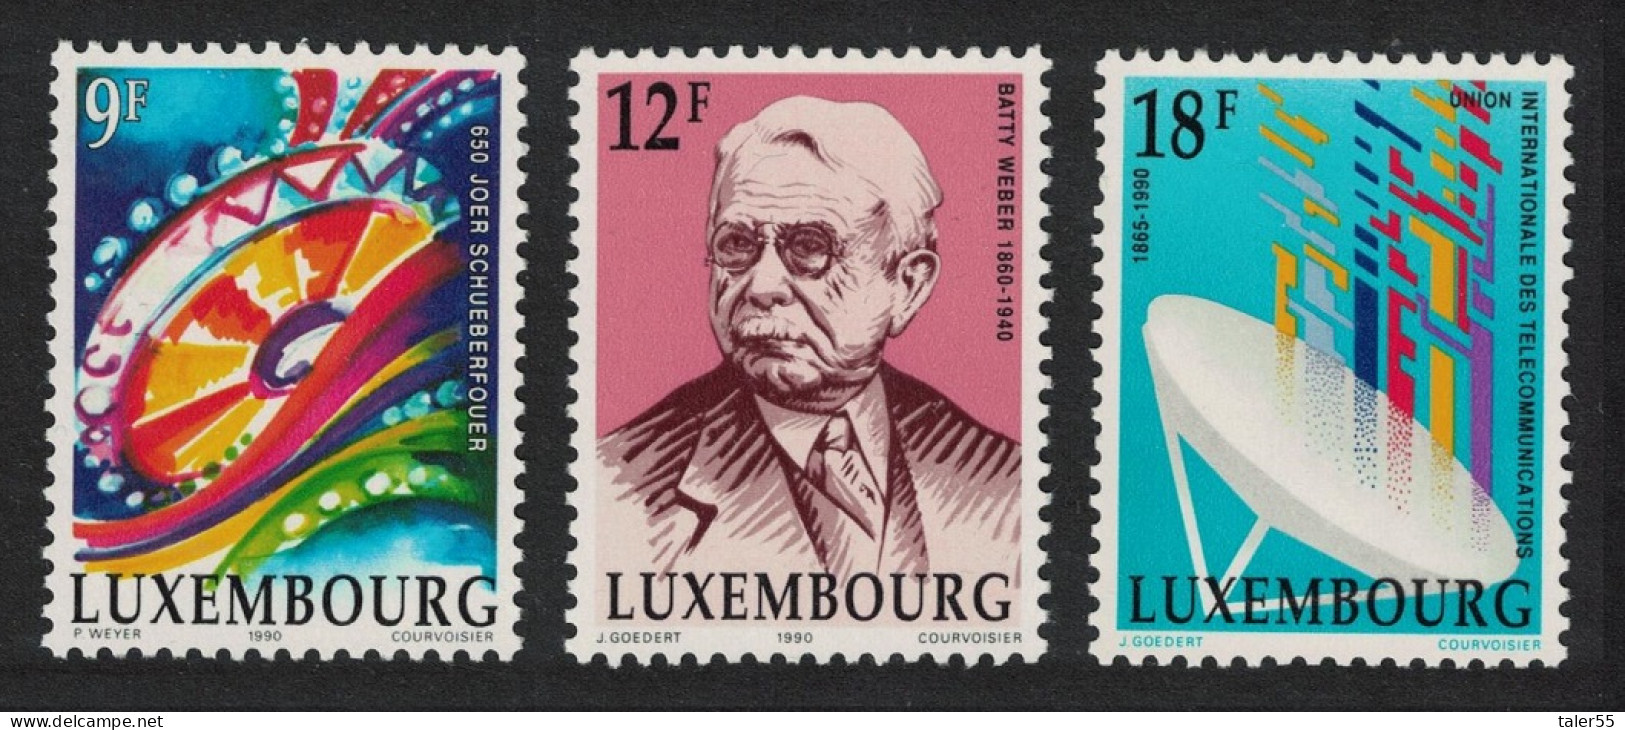 Luxembourg Telecommunications Writer Fun Fair 3v 1990 MNH SG#1263-1265 MI#1240-1242 - Unused Stamps